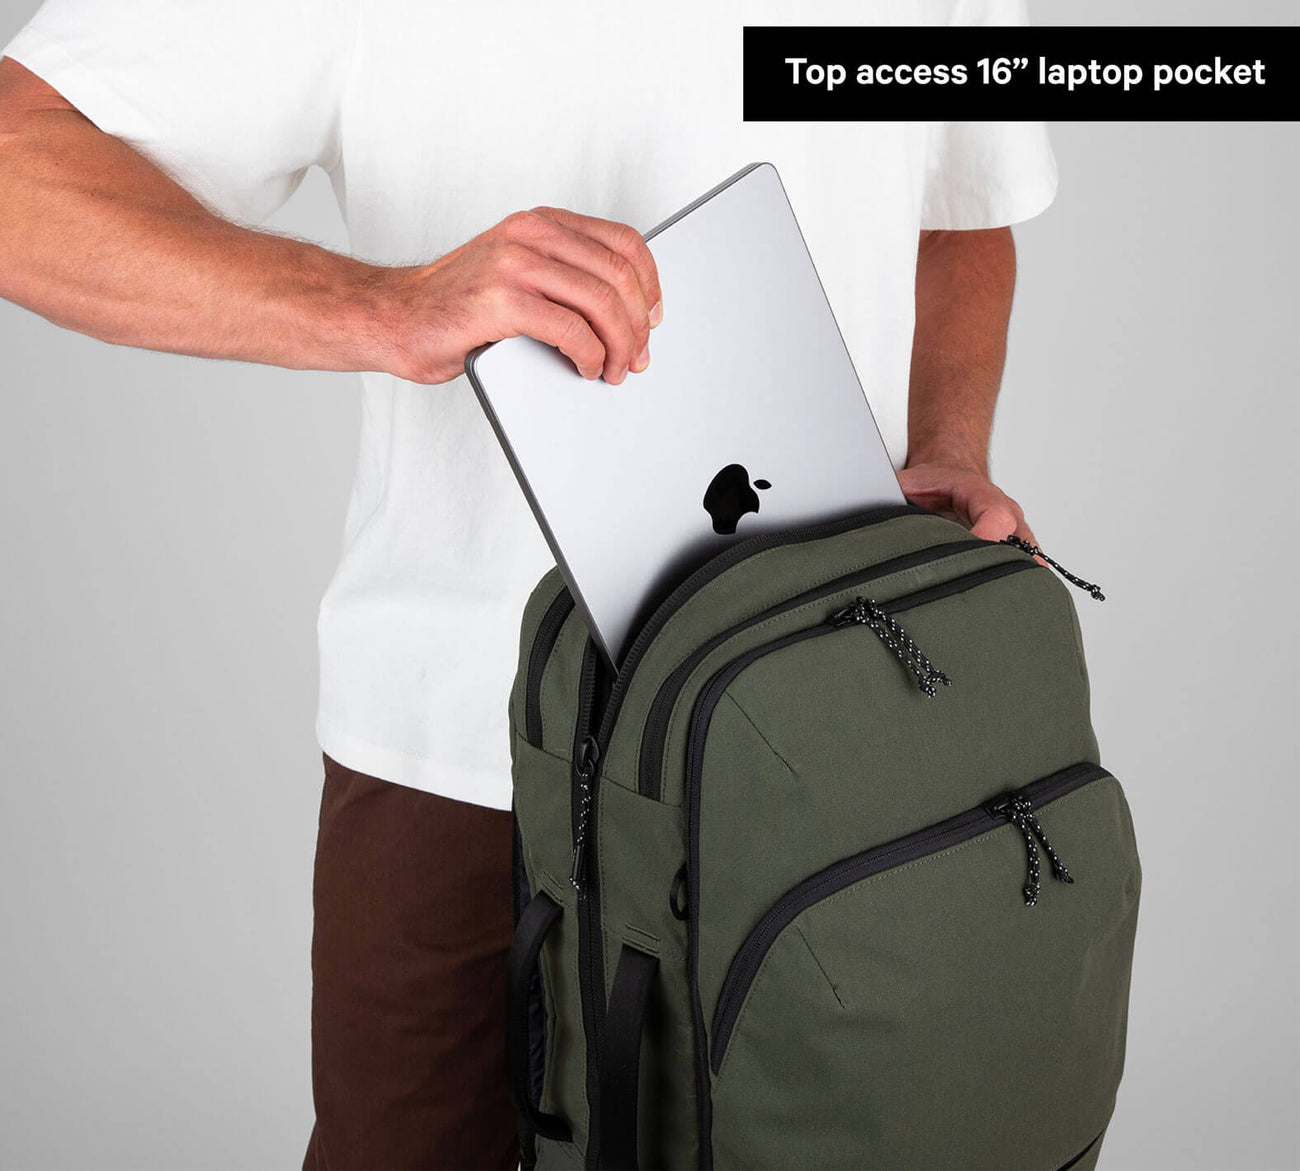 The Travel Backpack 2.0 - 35L/45L